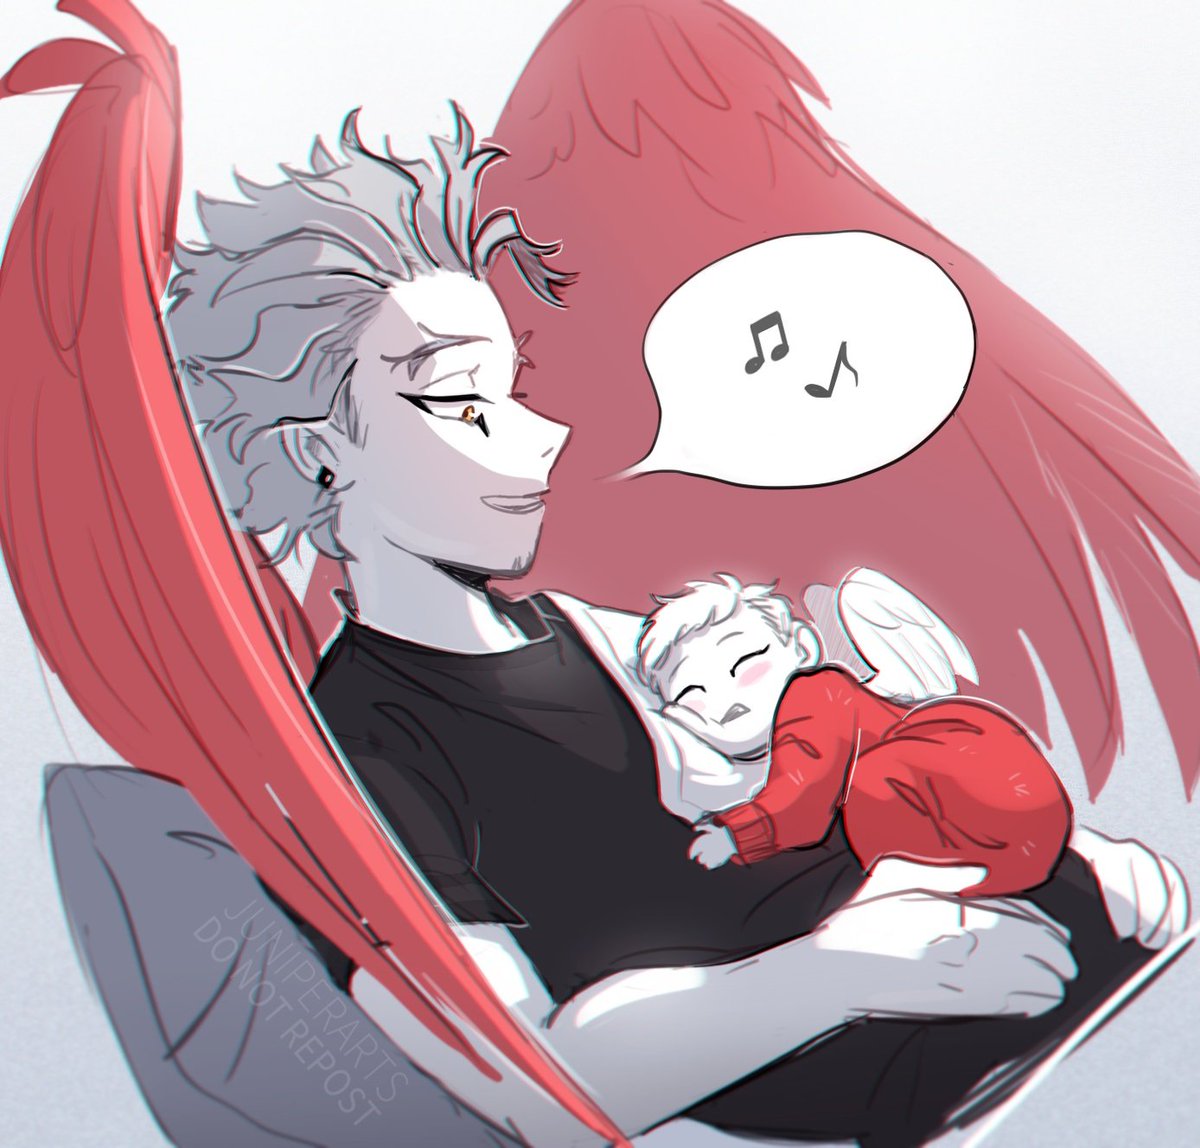 Way to cope: give your OTP a lovechild ?
#dabihawks, #bnha 